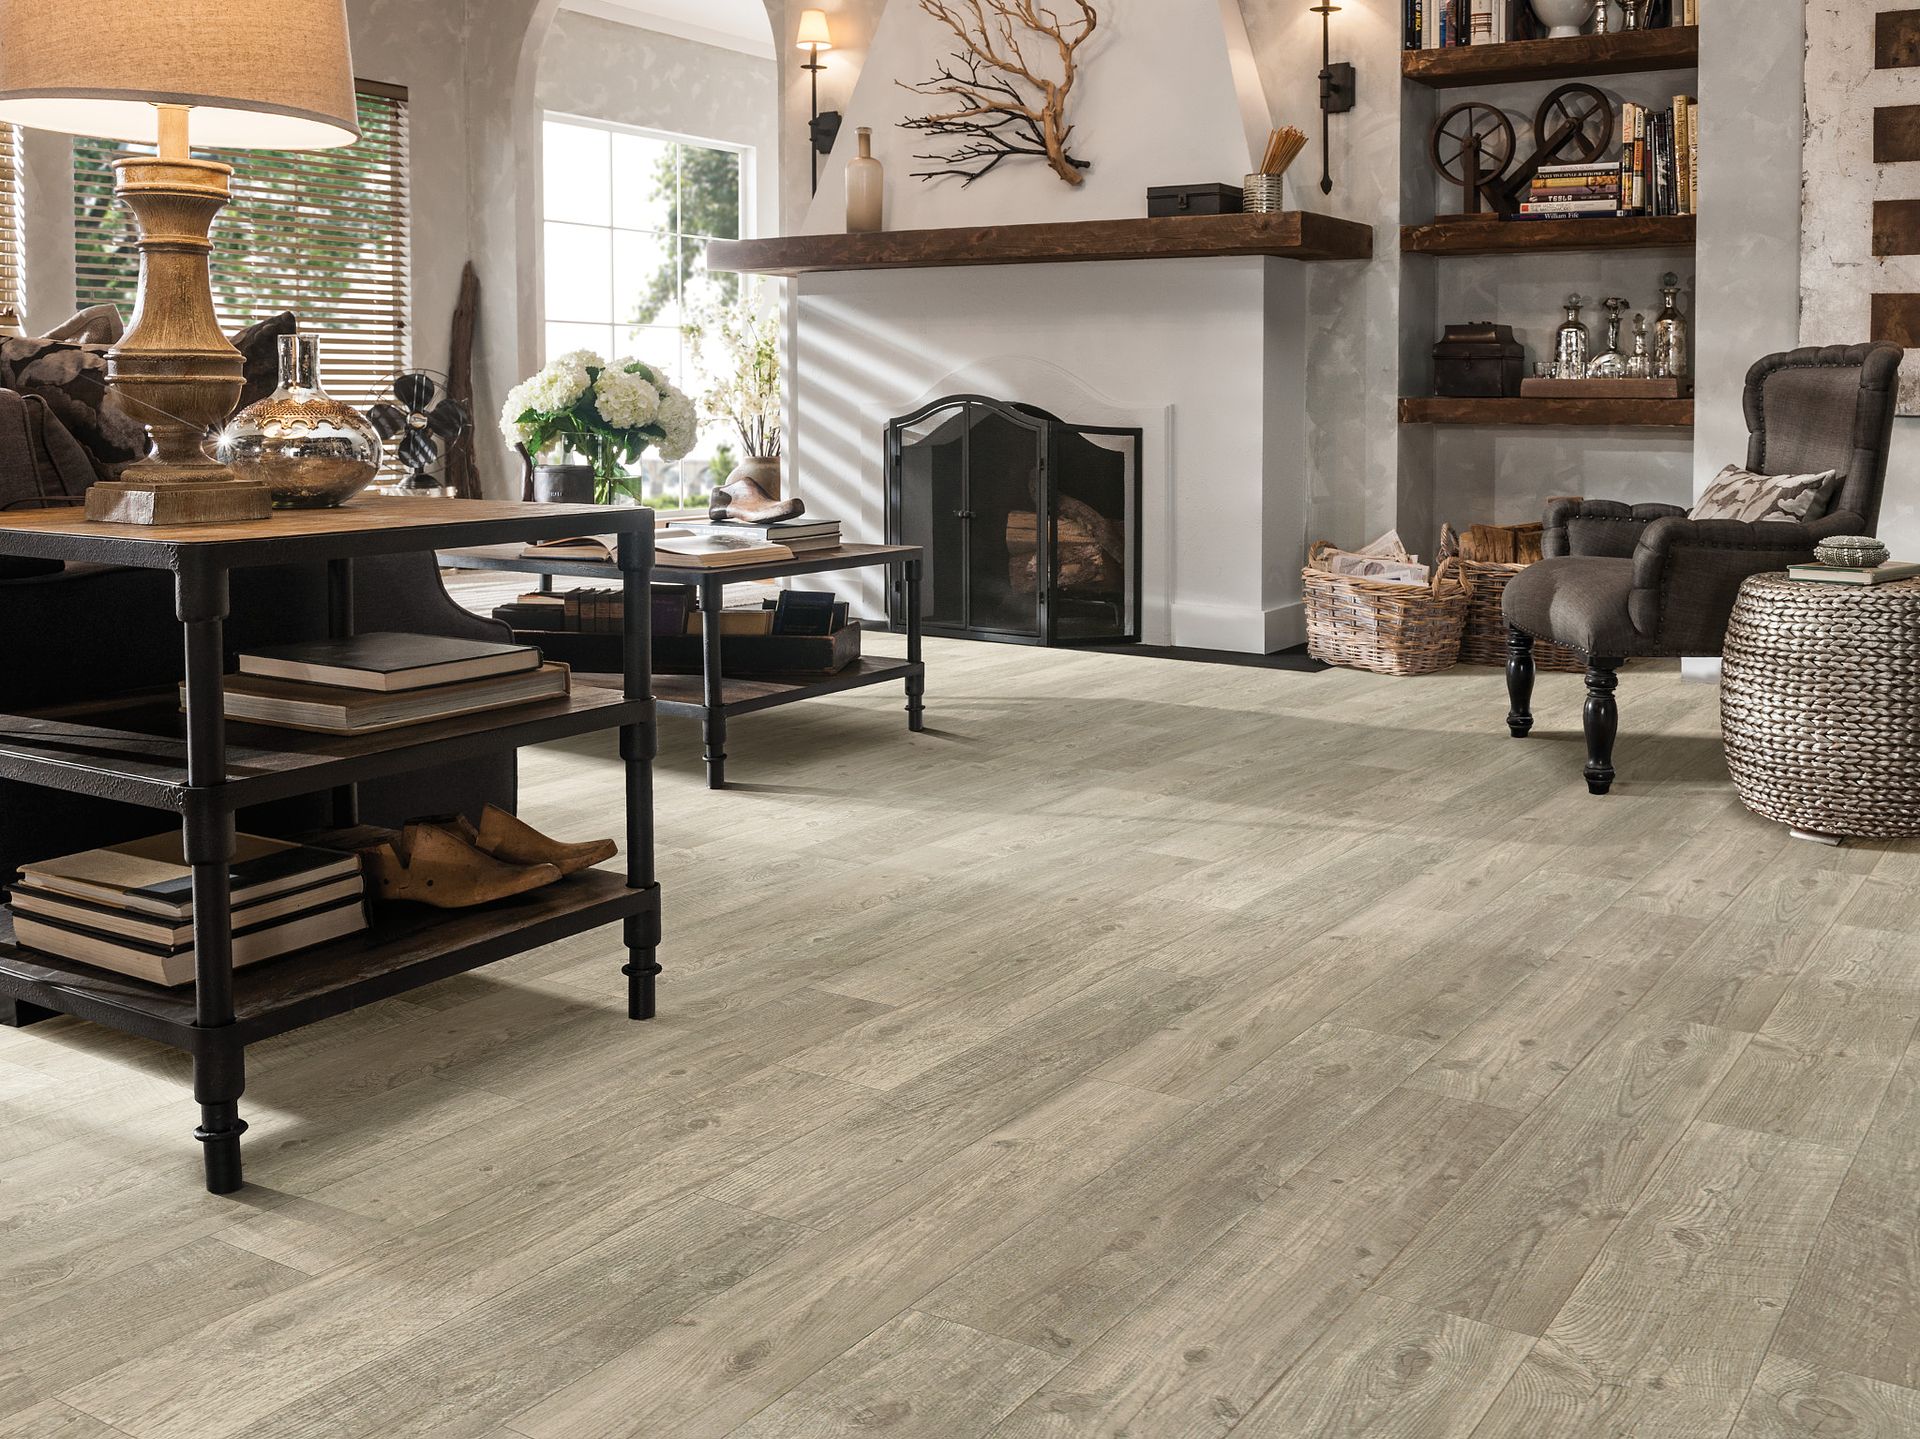 How To Maintain and Clean Luxury Vinyl Plank Flooring - California Carpets  Design Center